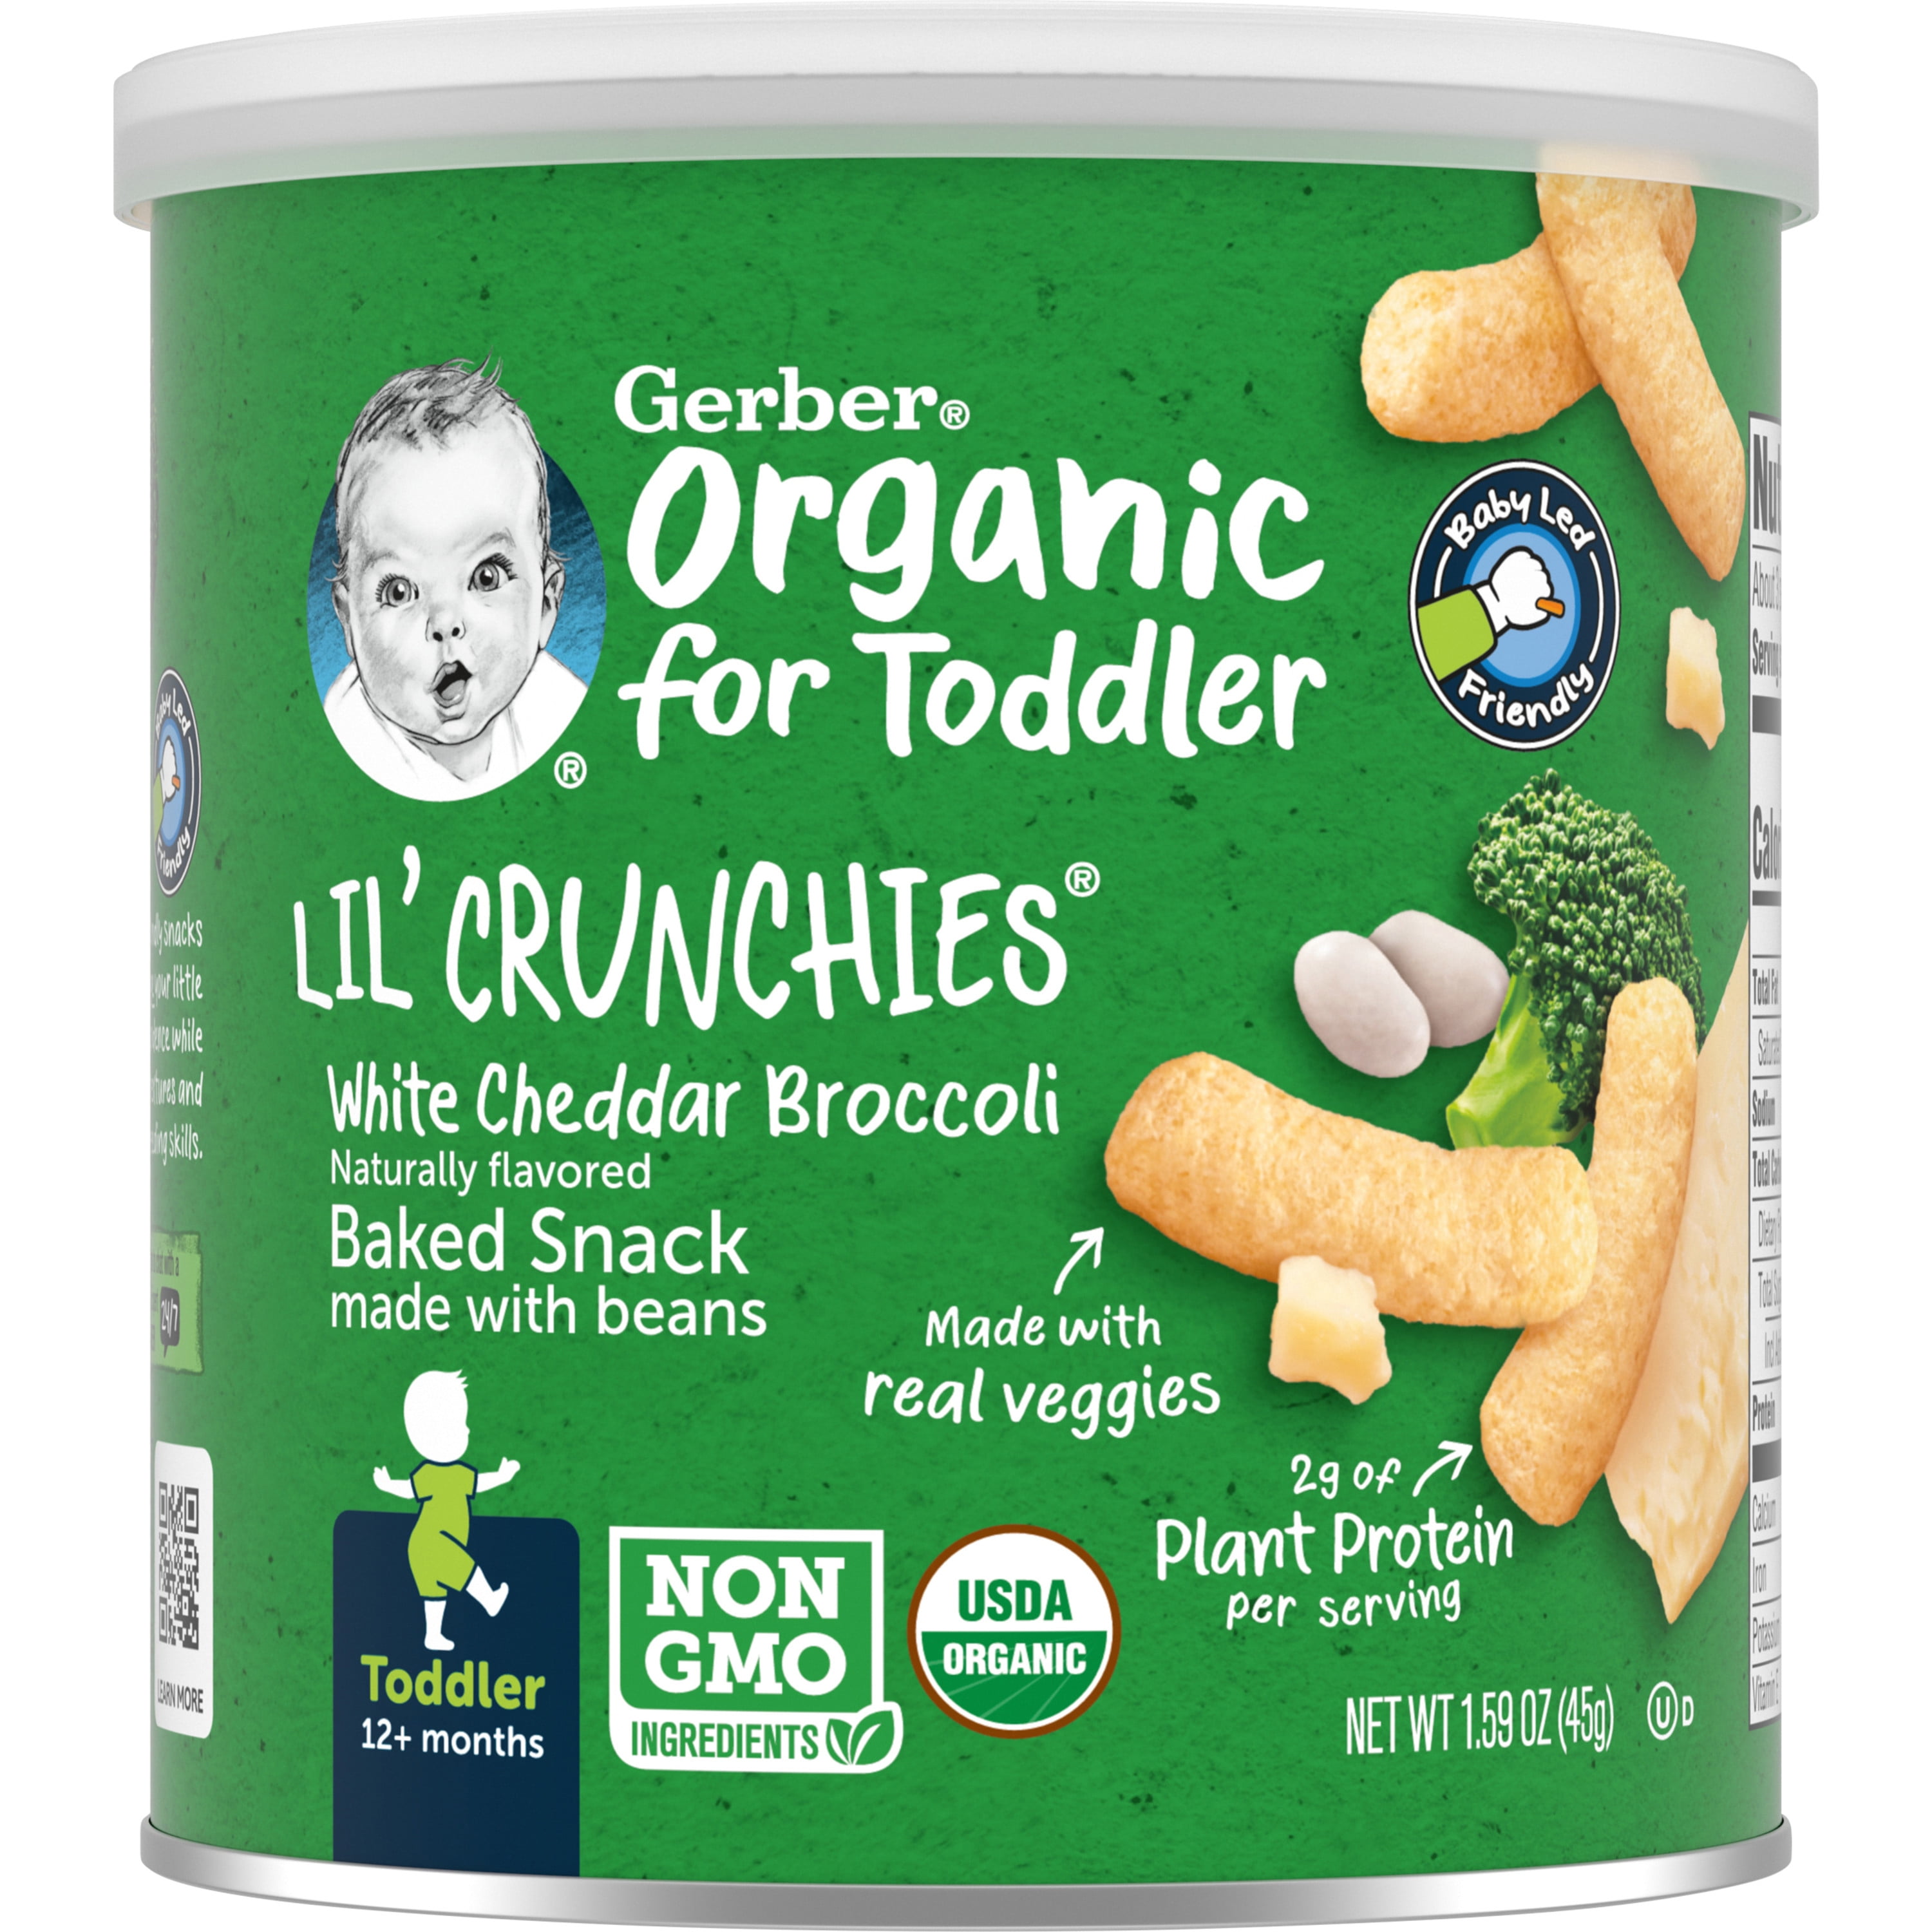 Gerber 2nd Foods Organic for Toddler, Lil' Crunchies, White Cheddar Broccoli, 1.59 oz Canister